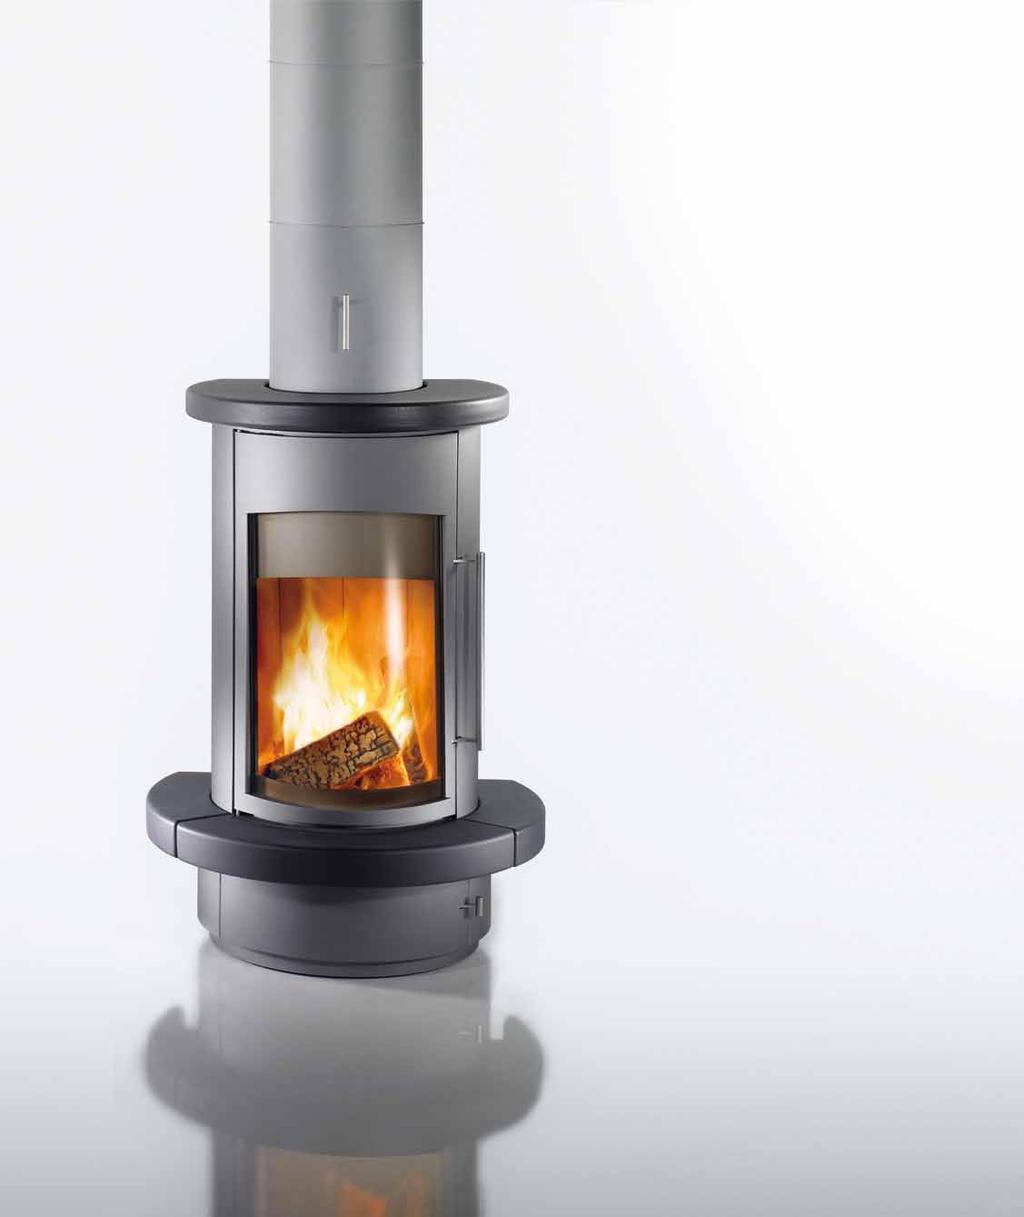 Kairo Silvergrey basalt Do you love the atmosphere that a splendid fire creates? Then the Kairo stove is an excellent choice. Behind the large fire box window, the fire unfolds in all its majesty.